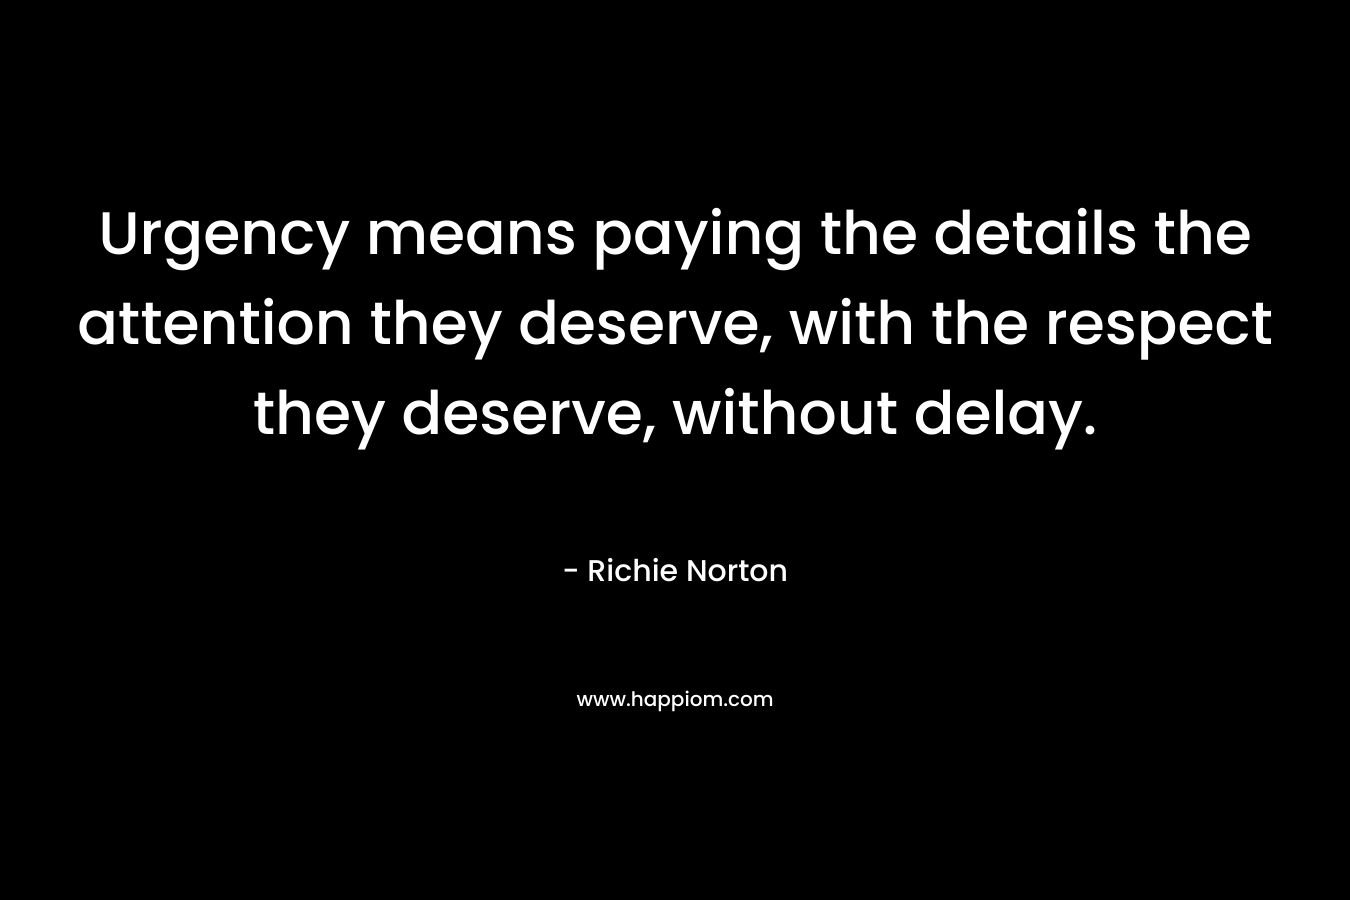 Urgency means paying the details the attention they deserve, with the respect they deserve, without delay. – Richie Norton